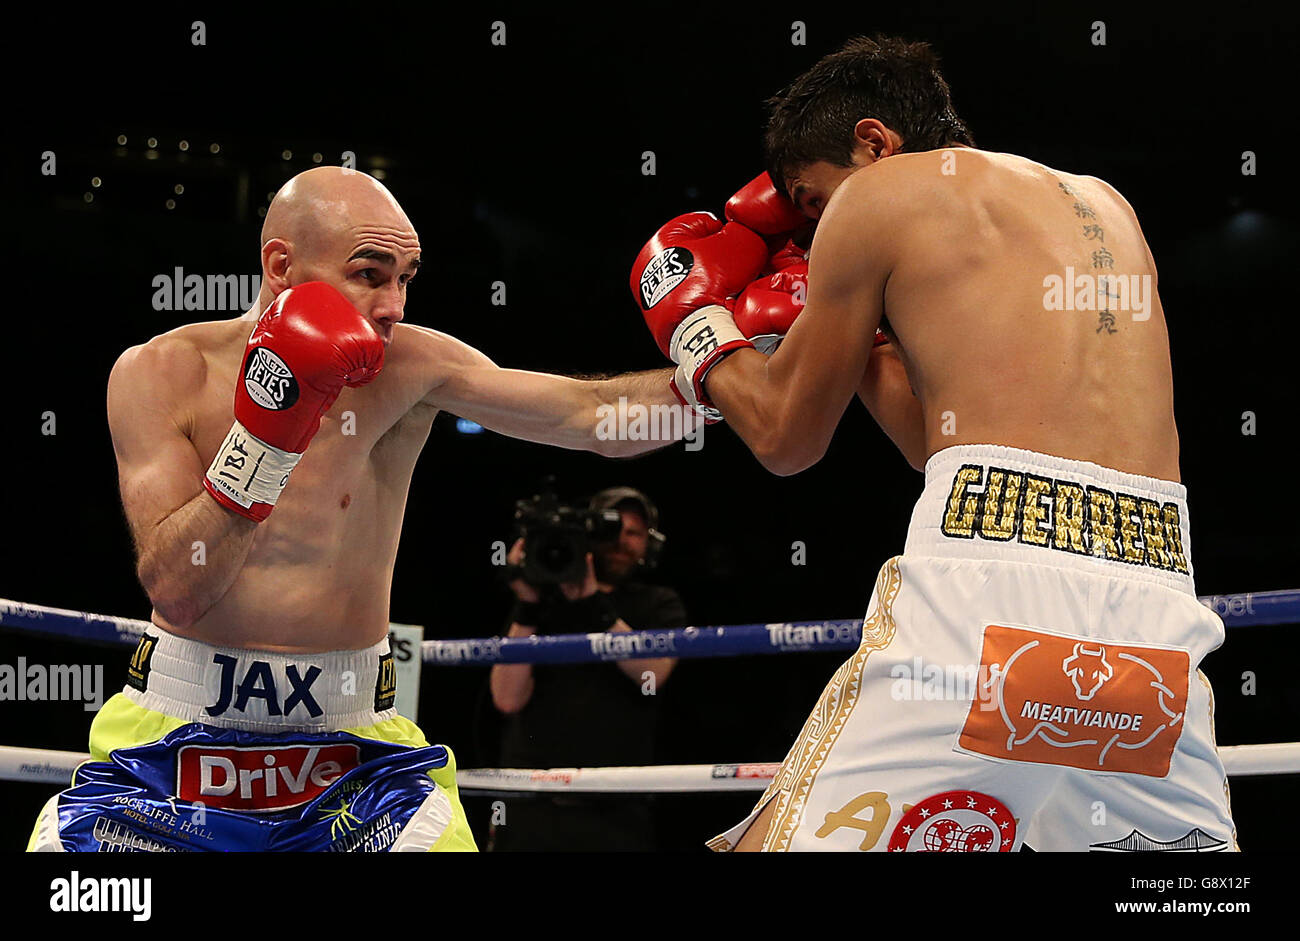 Stuart Hall (left) and Rodrigo Guerrero during the IBF Final Eliminator Bantamweight Championship bout at the First Direct Arena, Leeds. Stock Photo